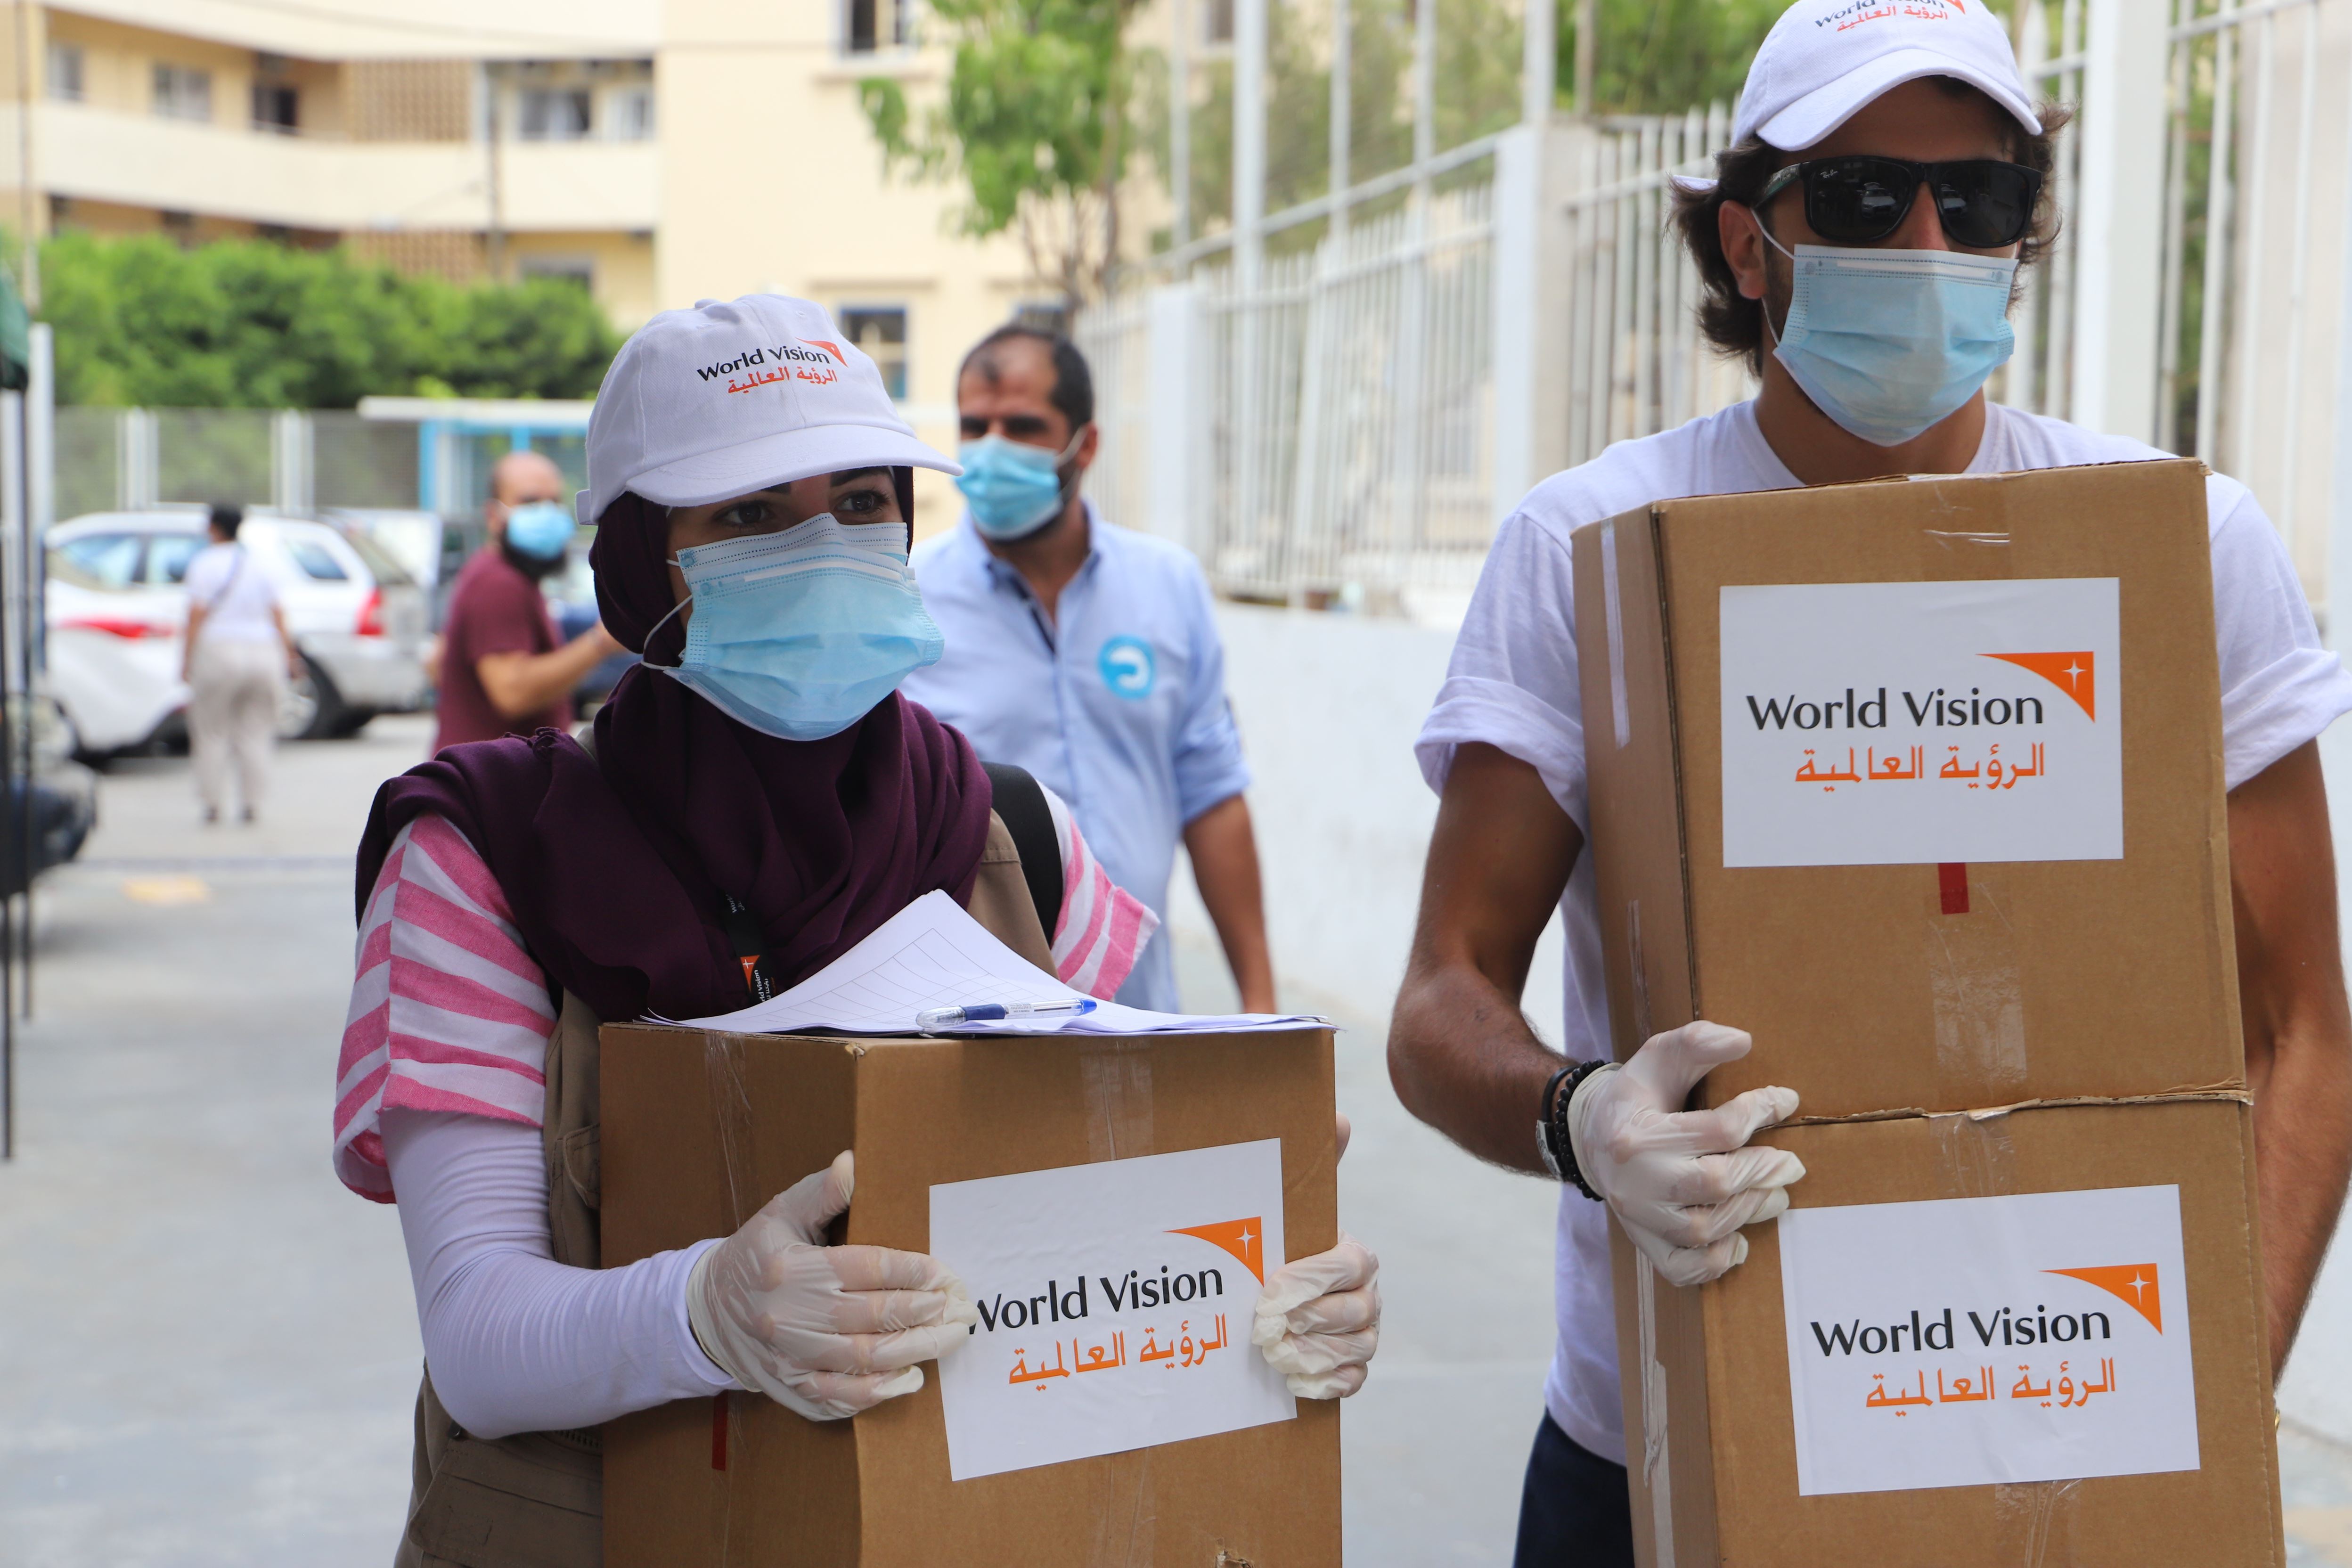 Staff members in masks and gloves carry boxes to distribute mini food kits